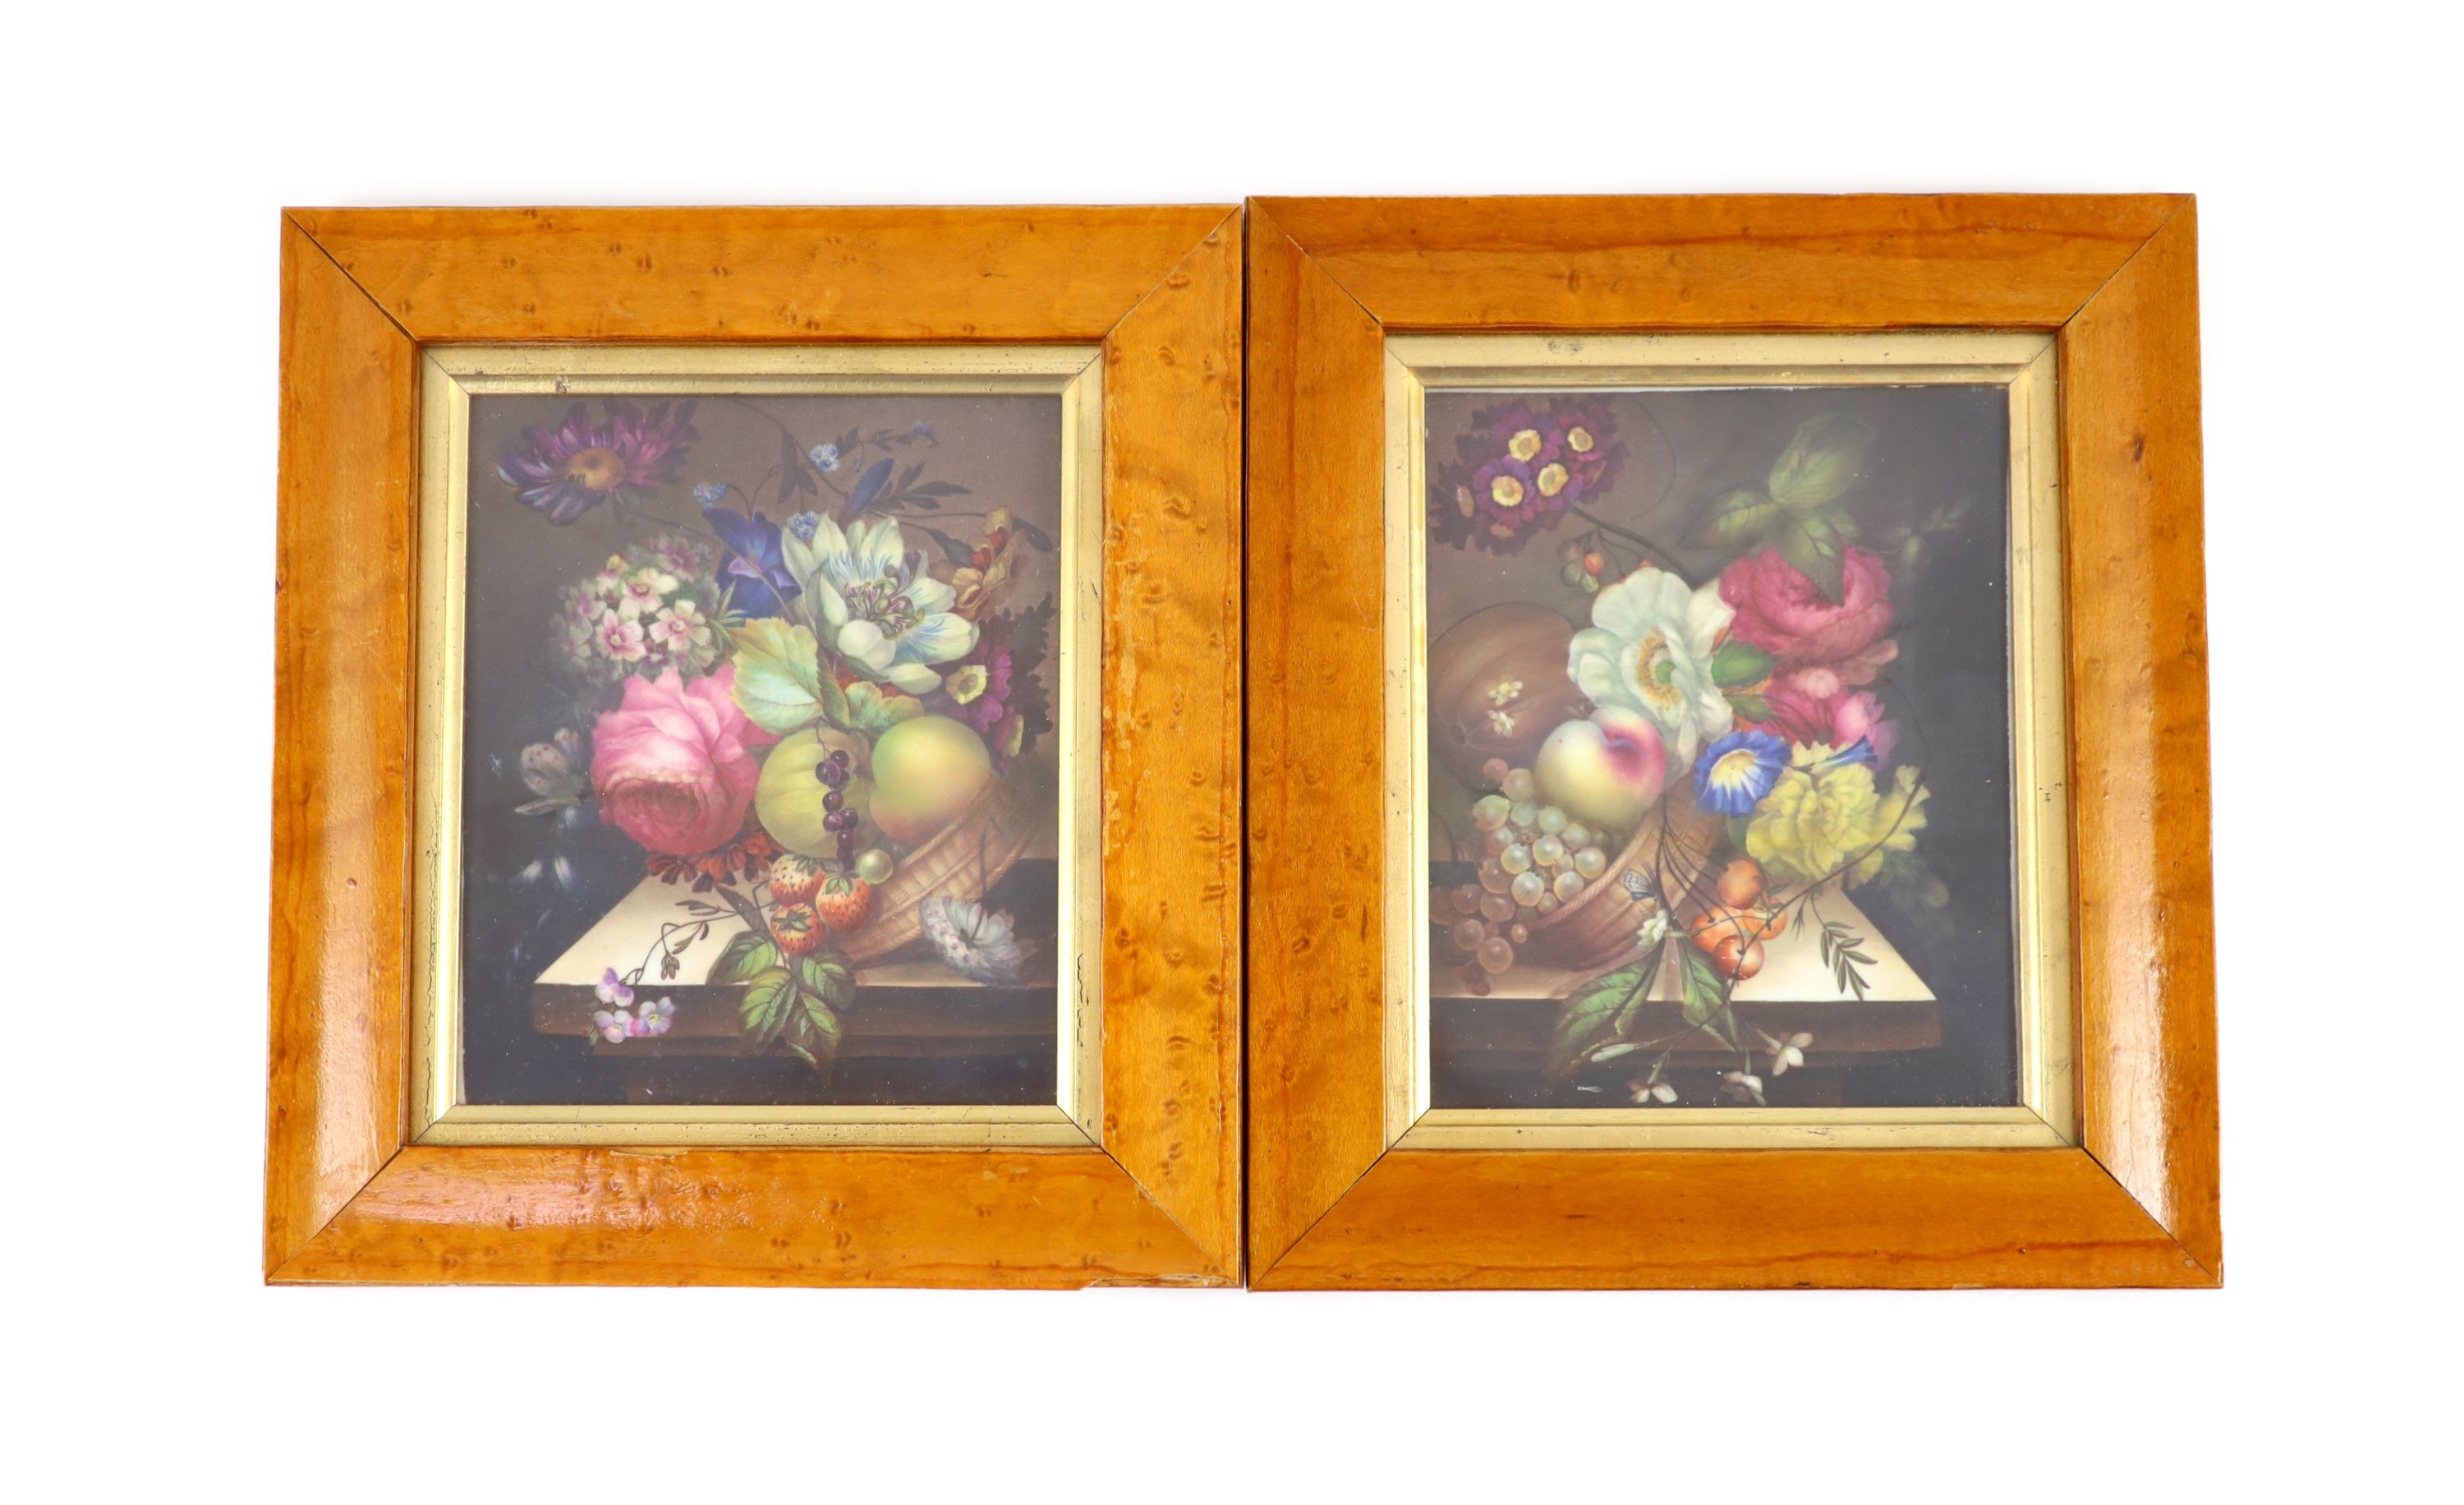 A pair of Derby porcelain plaques, attributed to Thomas Steele, c.1815, 17cm x 14cm